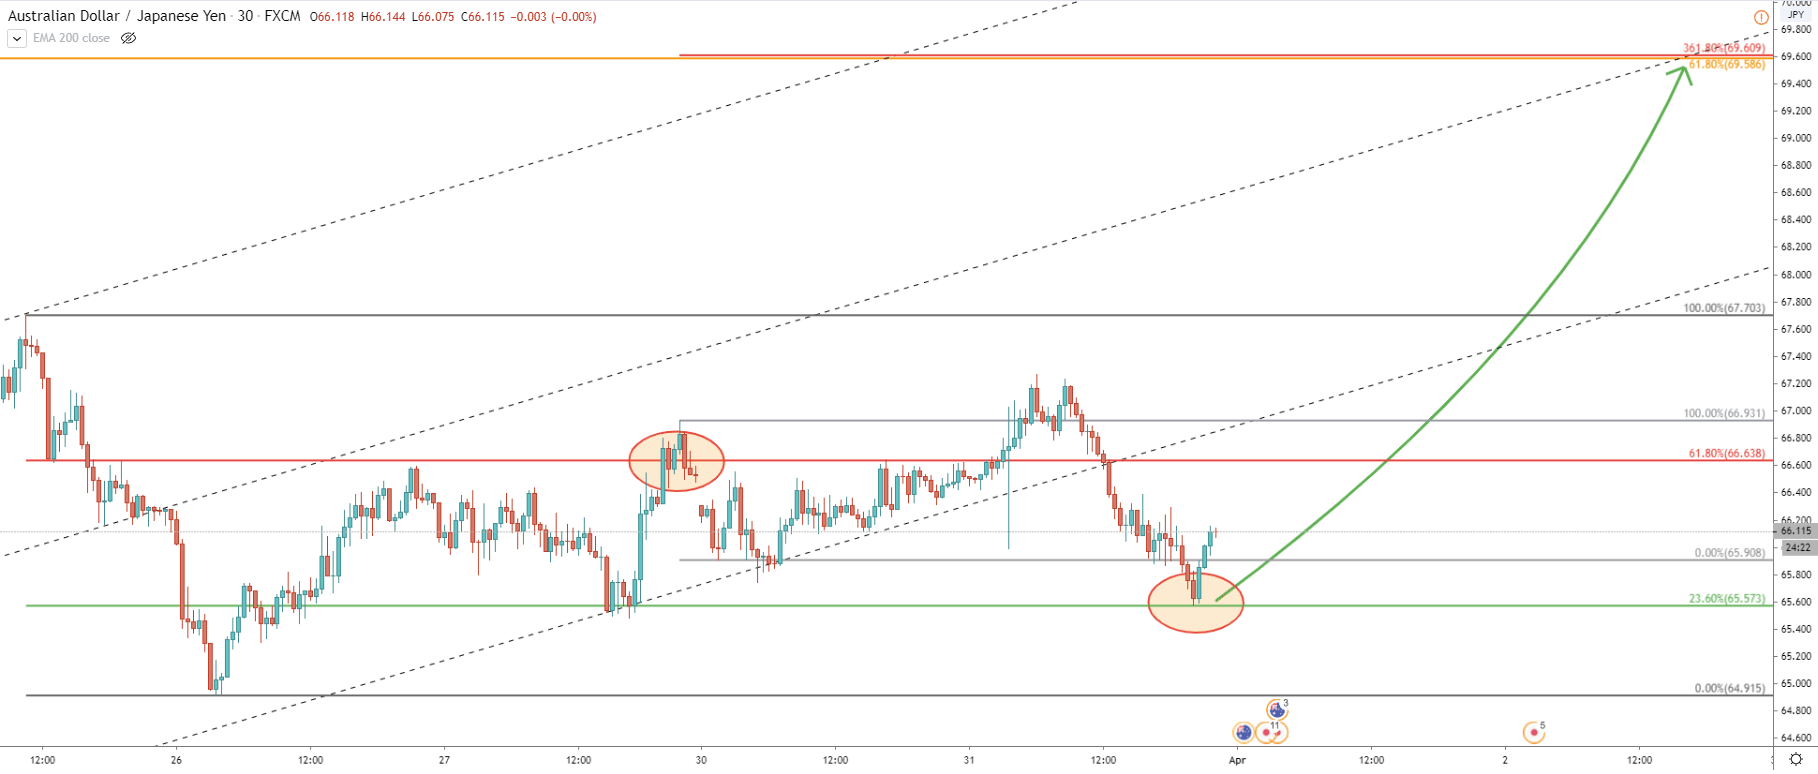 AUD/JPY 30-Minute Technical Analysis 31 Mar 2020